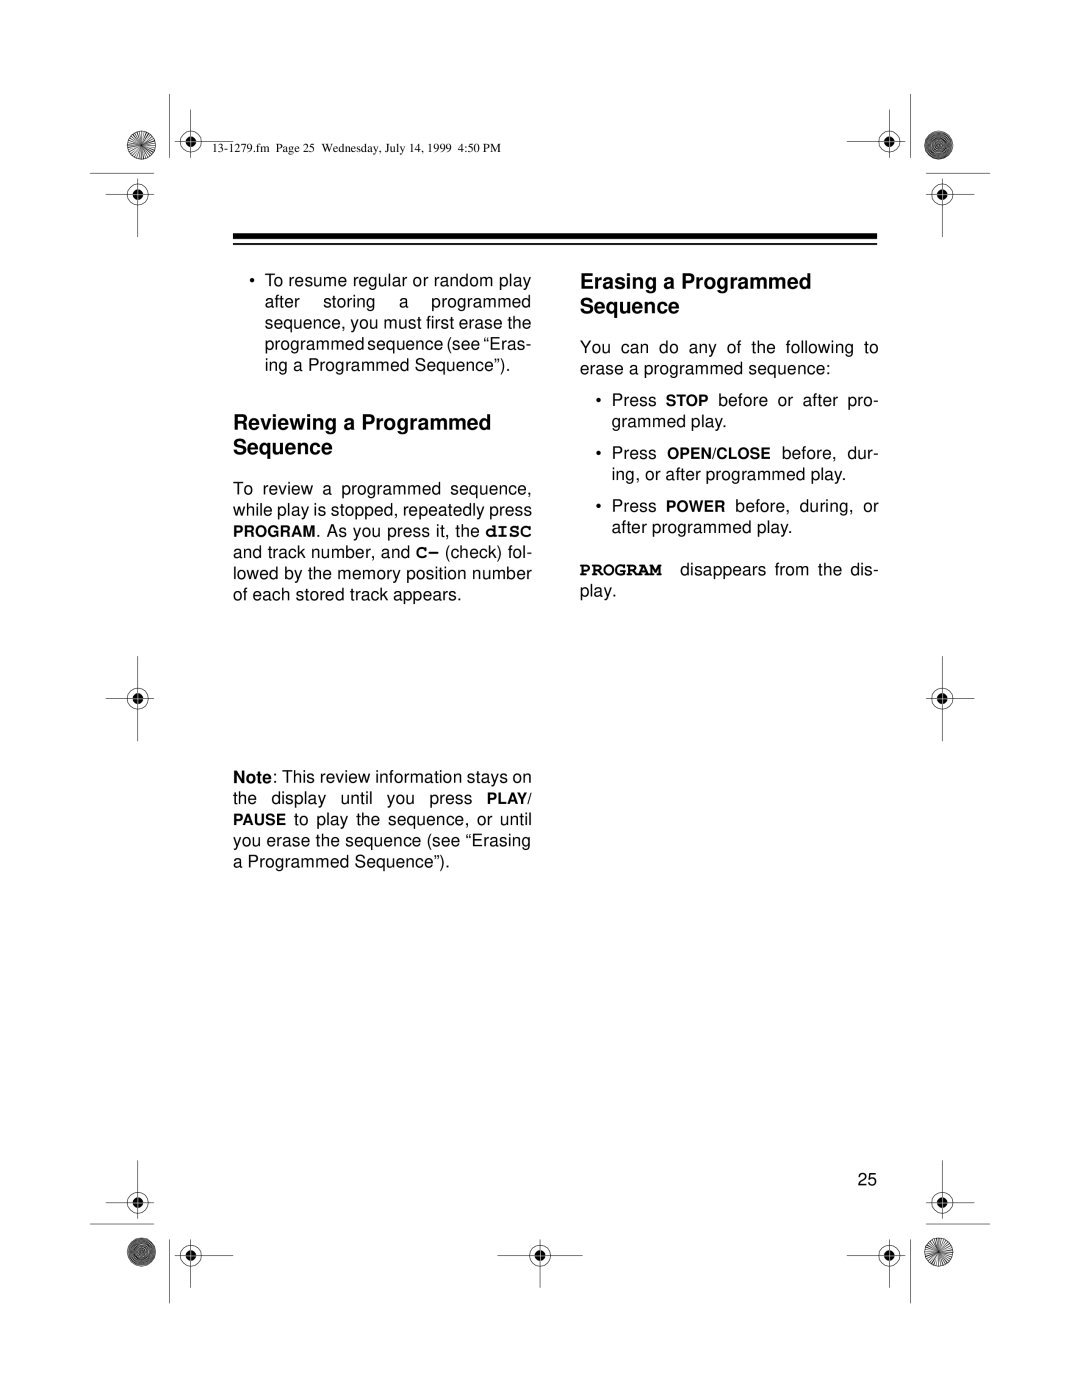 Optimus SYSTEM 734 owner manual Reviewing a Programmed Sequence, Erasing a Programmed Sequence 